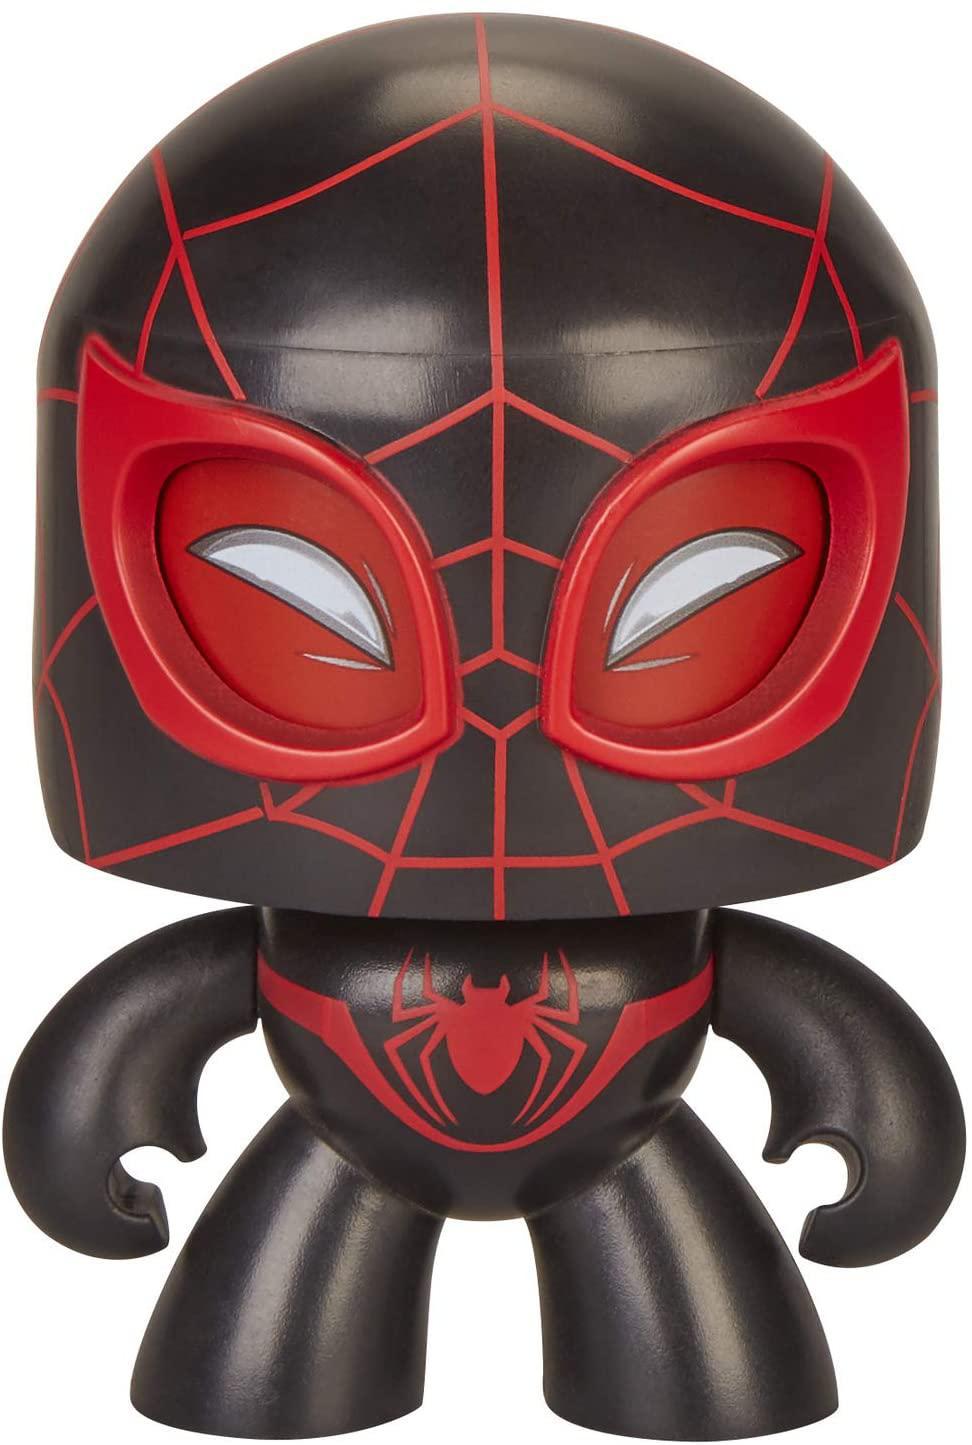 Marvel Mighty Muggs Assortment: Spider-Ham, Spider-Gwen, Spider-Man, Mile Morales - 3 Different Facial Expressions, Great Marvel Fan Gift